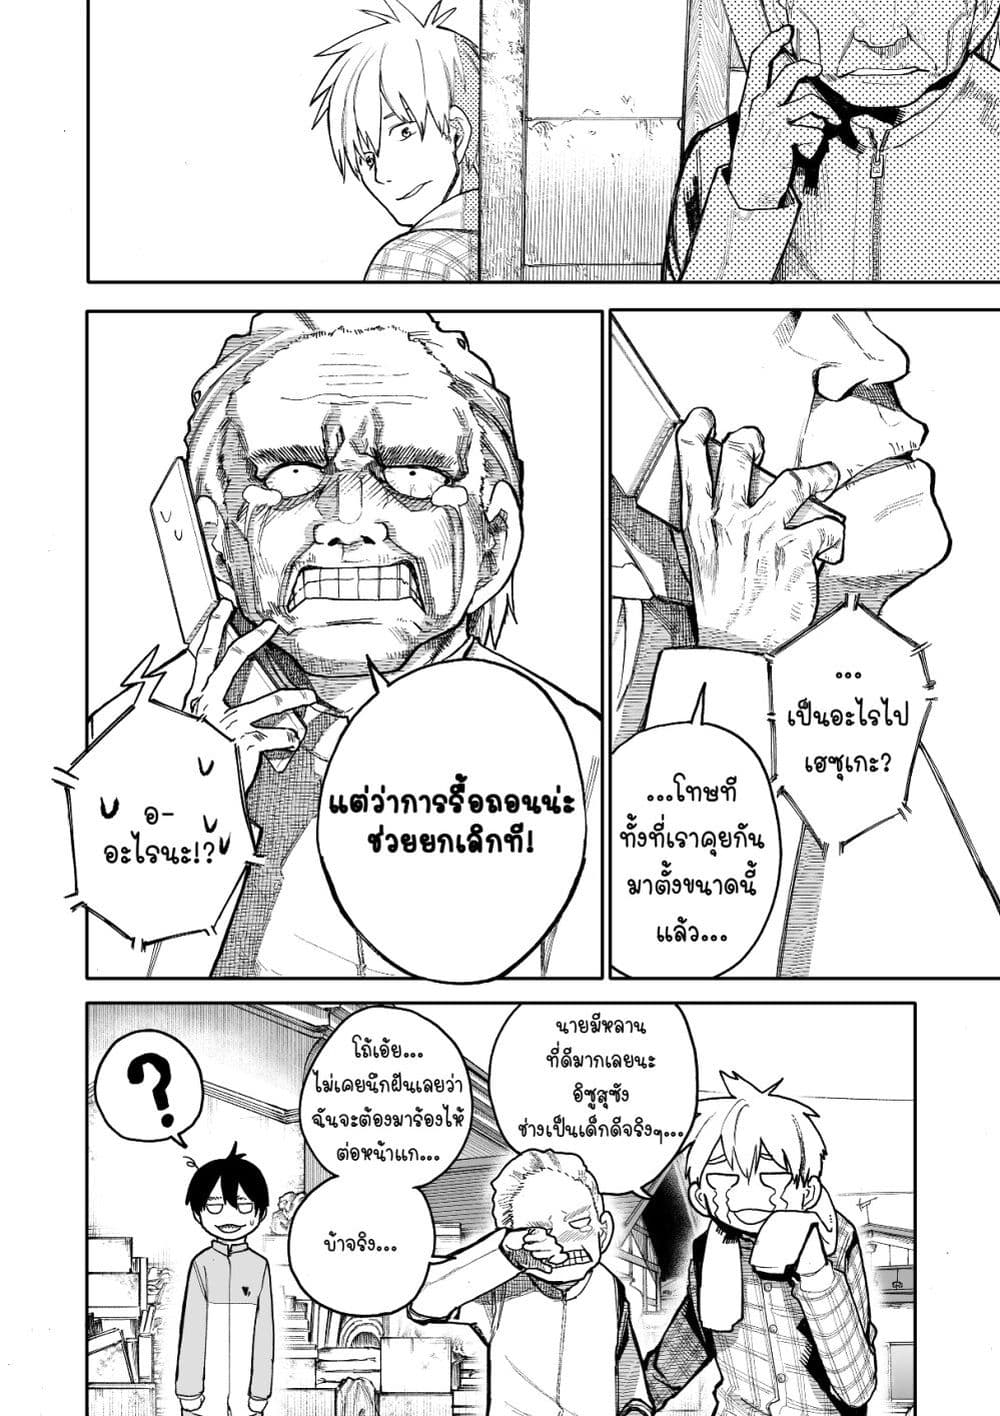 A Story About A Grampa and Granma Returned Back to their Youth คู่รักวัยดึกหวนคืนวัยหวาน 62-62